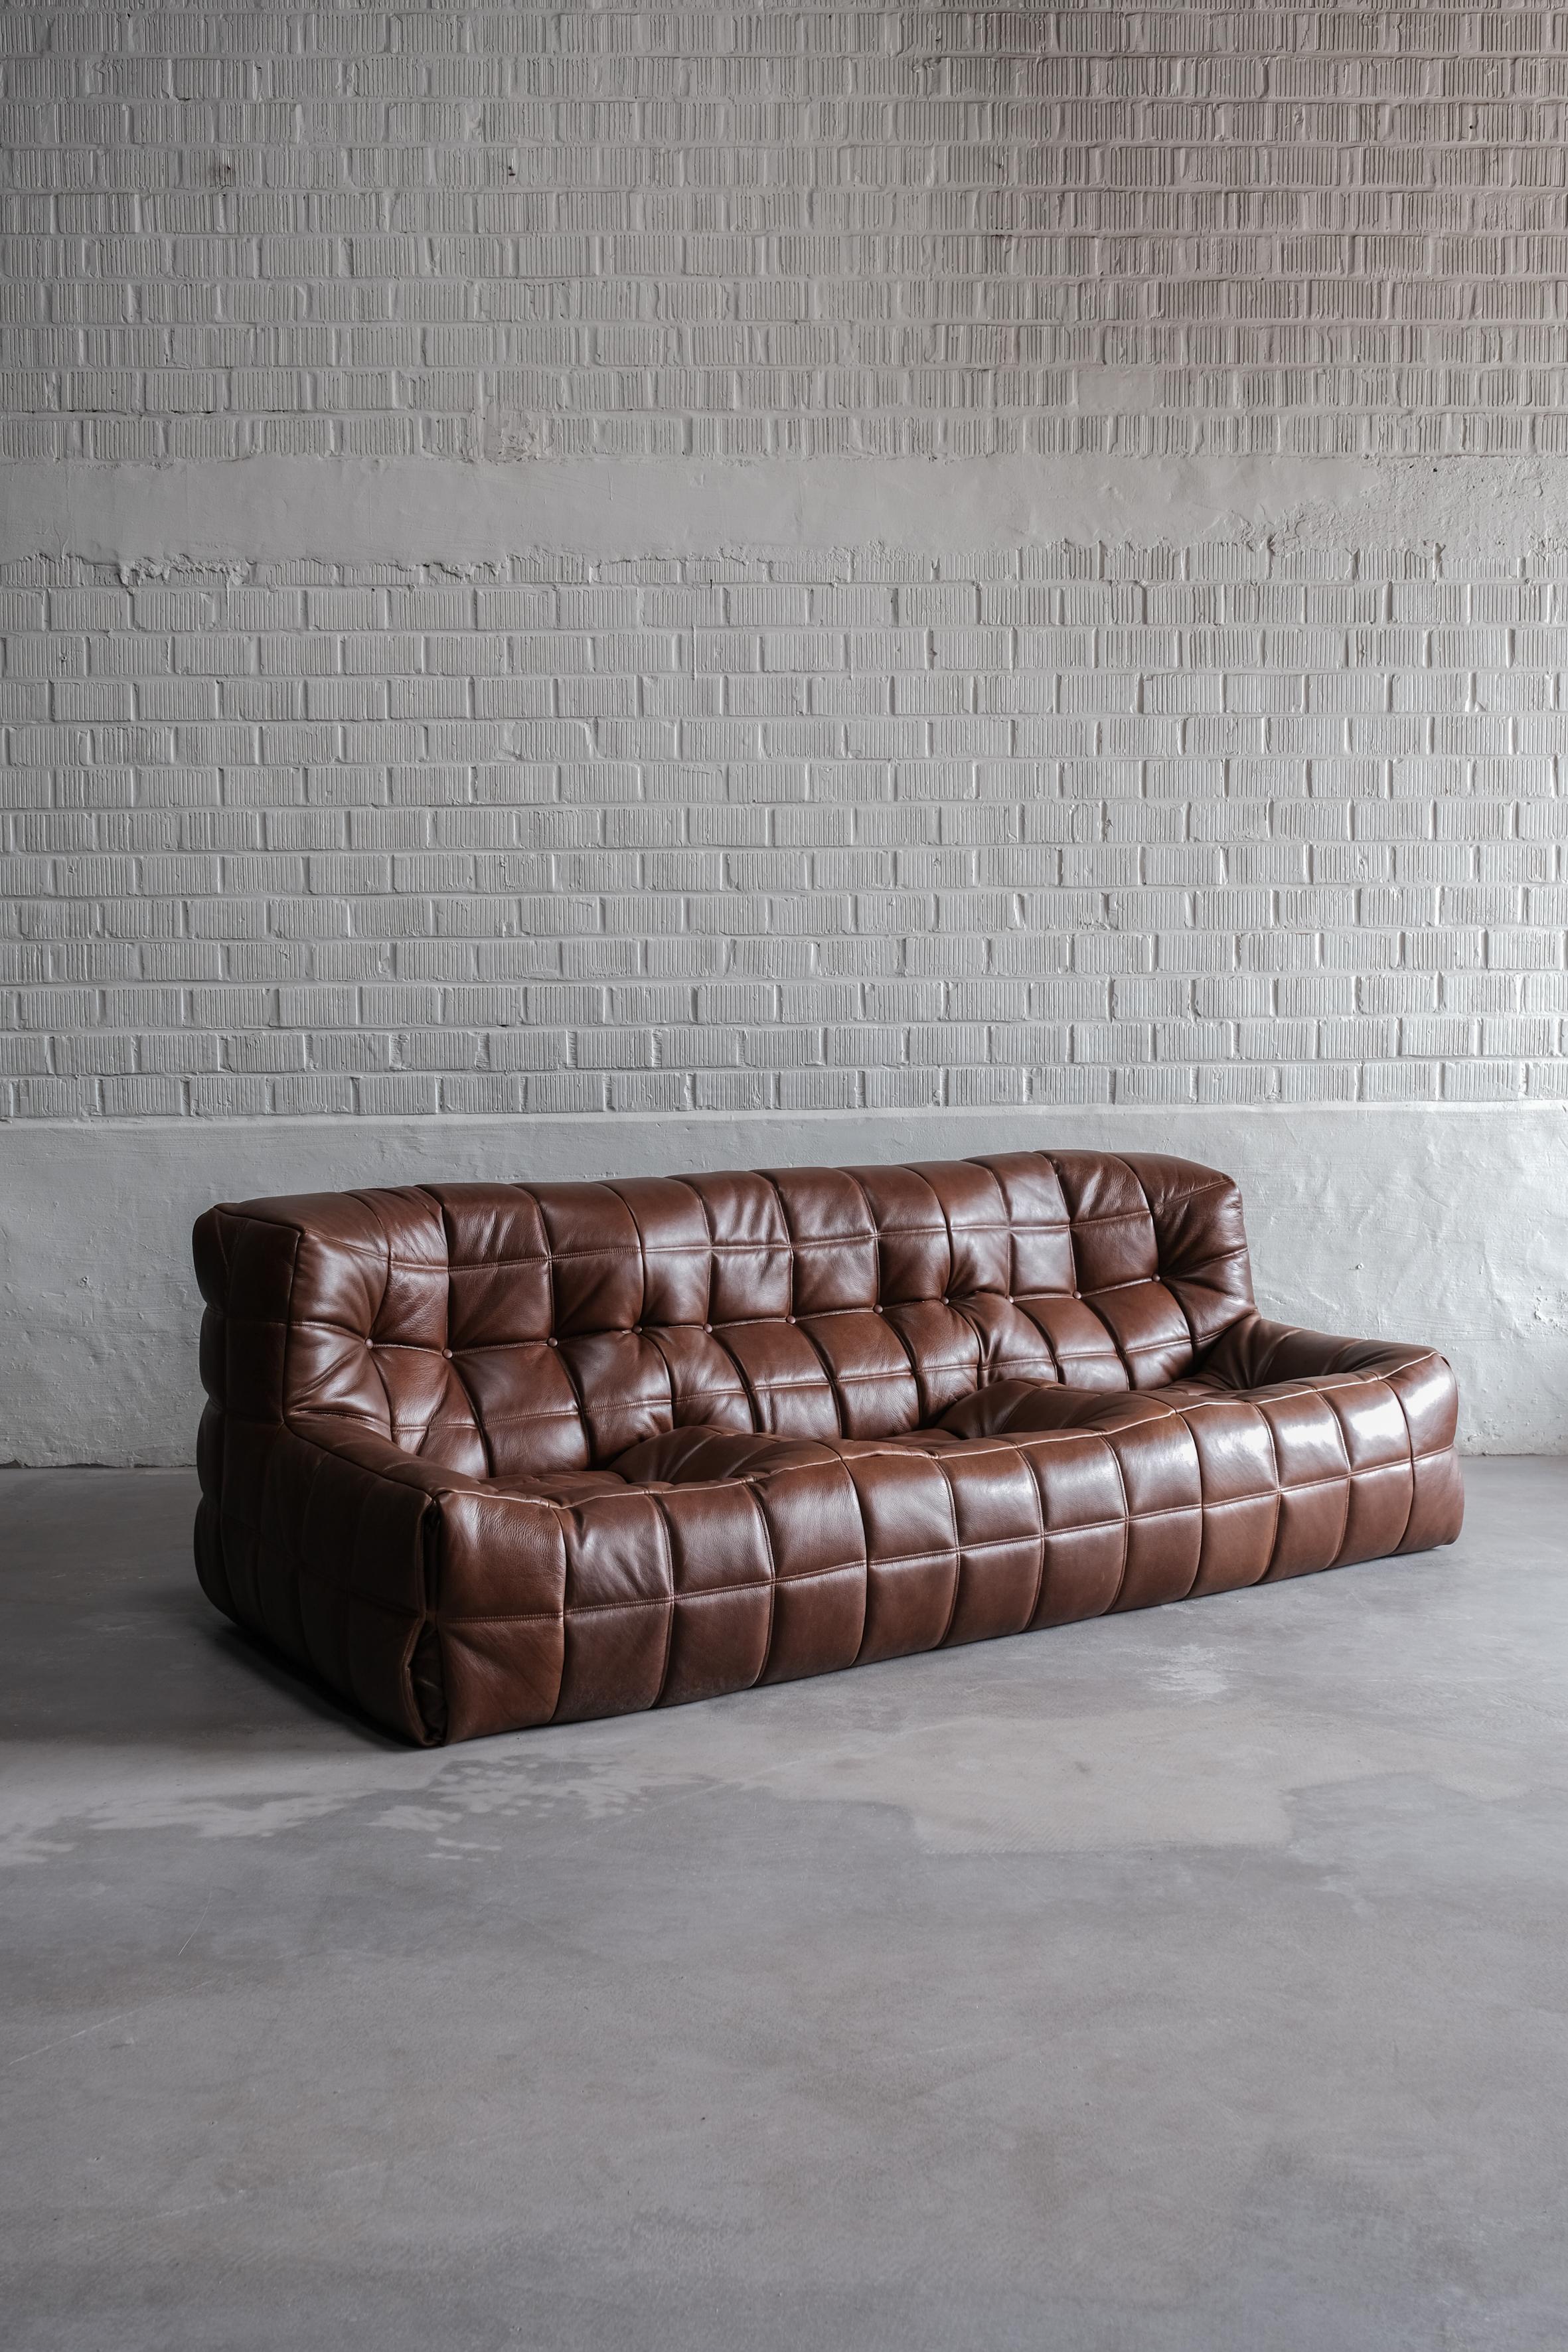 Rare kashima 3 seater designed by Michel Ducaroy. 
This 3 seater with dark brown leather is in excellent condition and is an eye catcher in every room. 